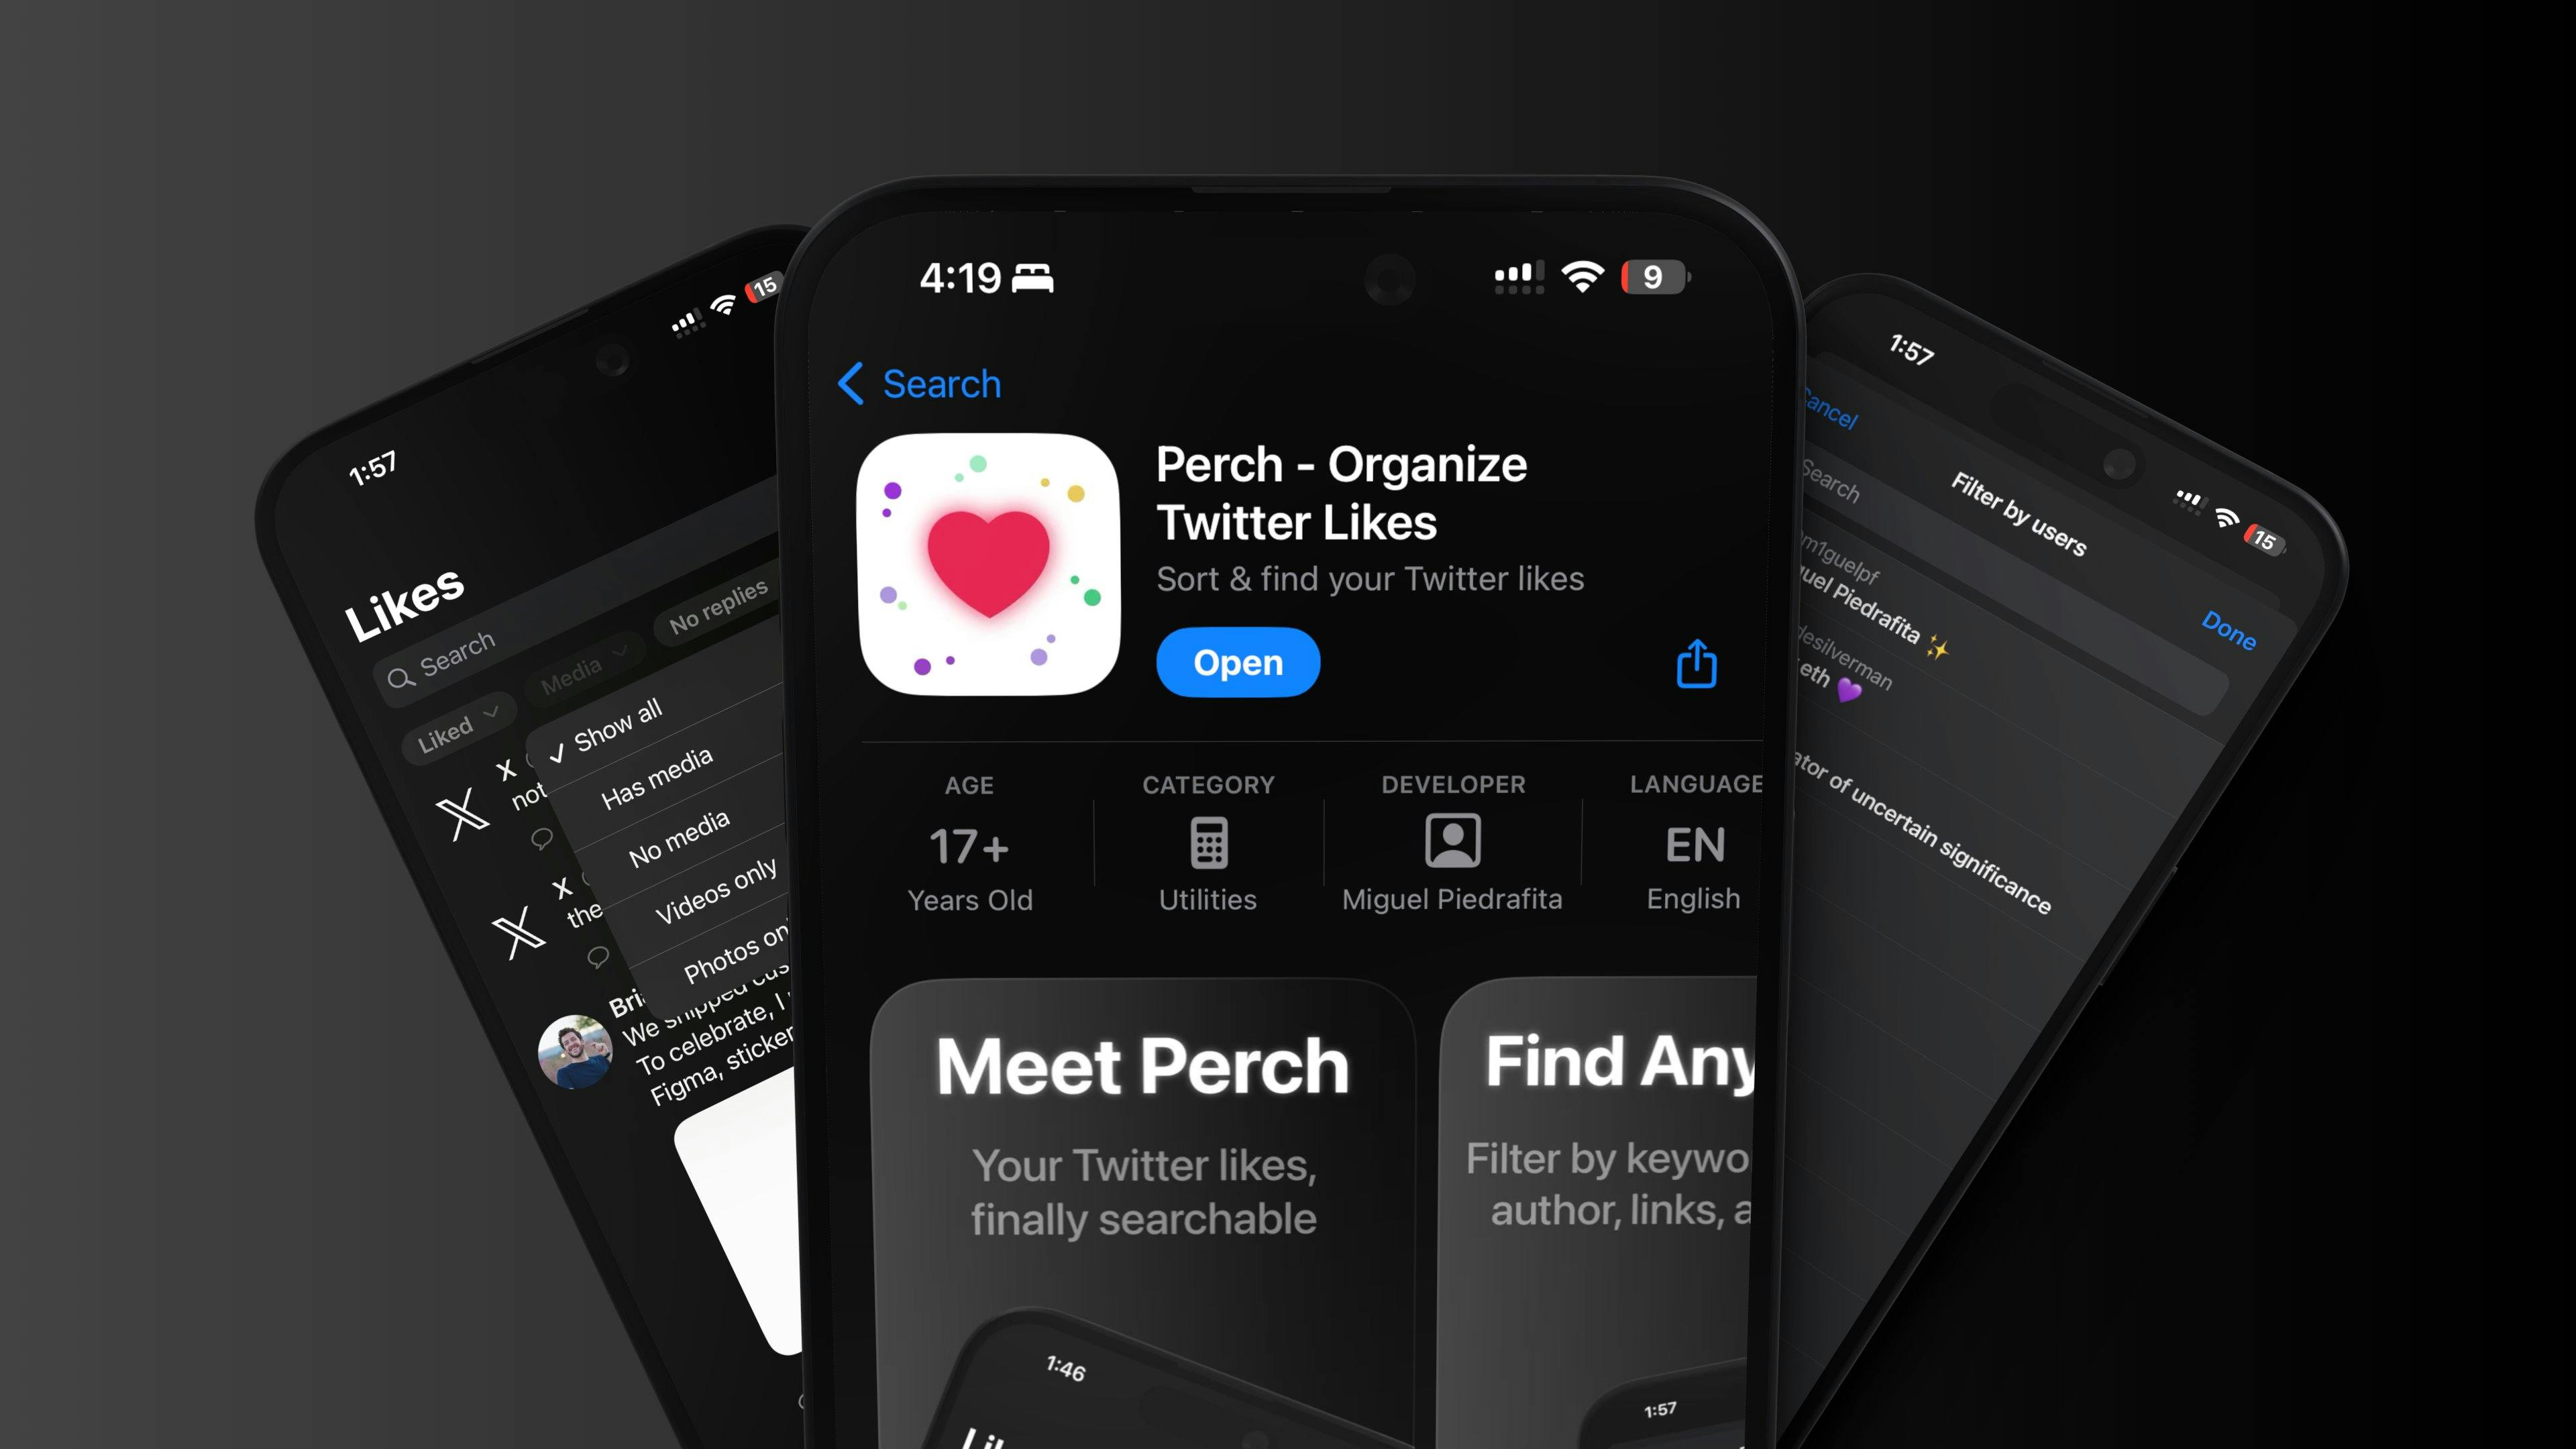 Promotional image for Perch – a refreshingly simple app for managing your Twitter likes, designed to make finding "that one tweet" a breeze.